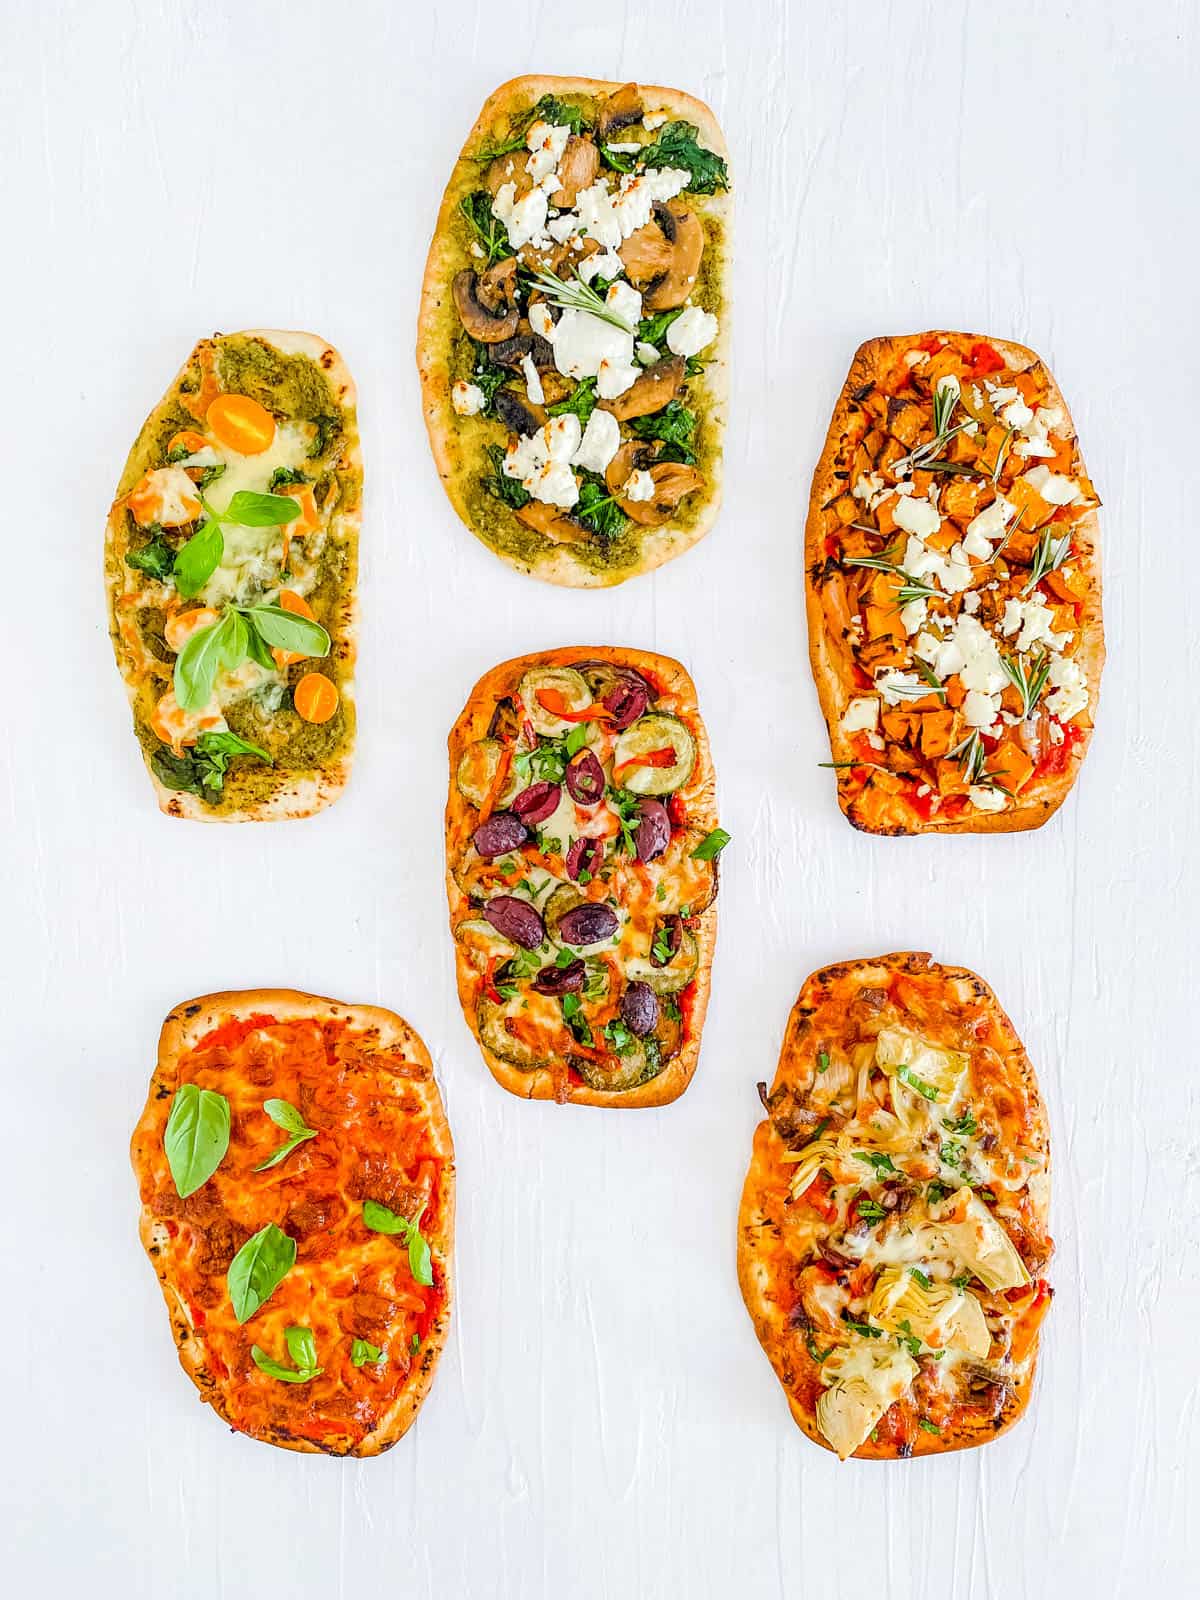 Variety of naan bread pizza recipes with different toppings on a white background.